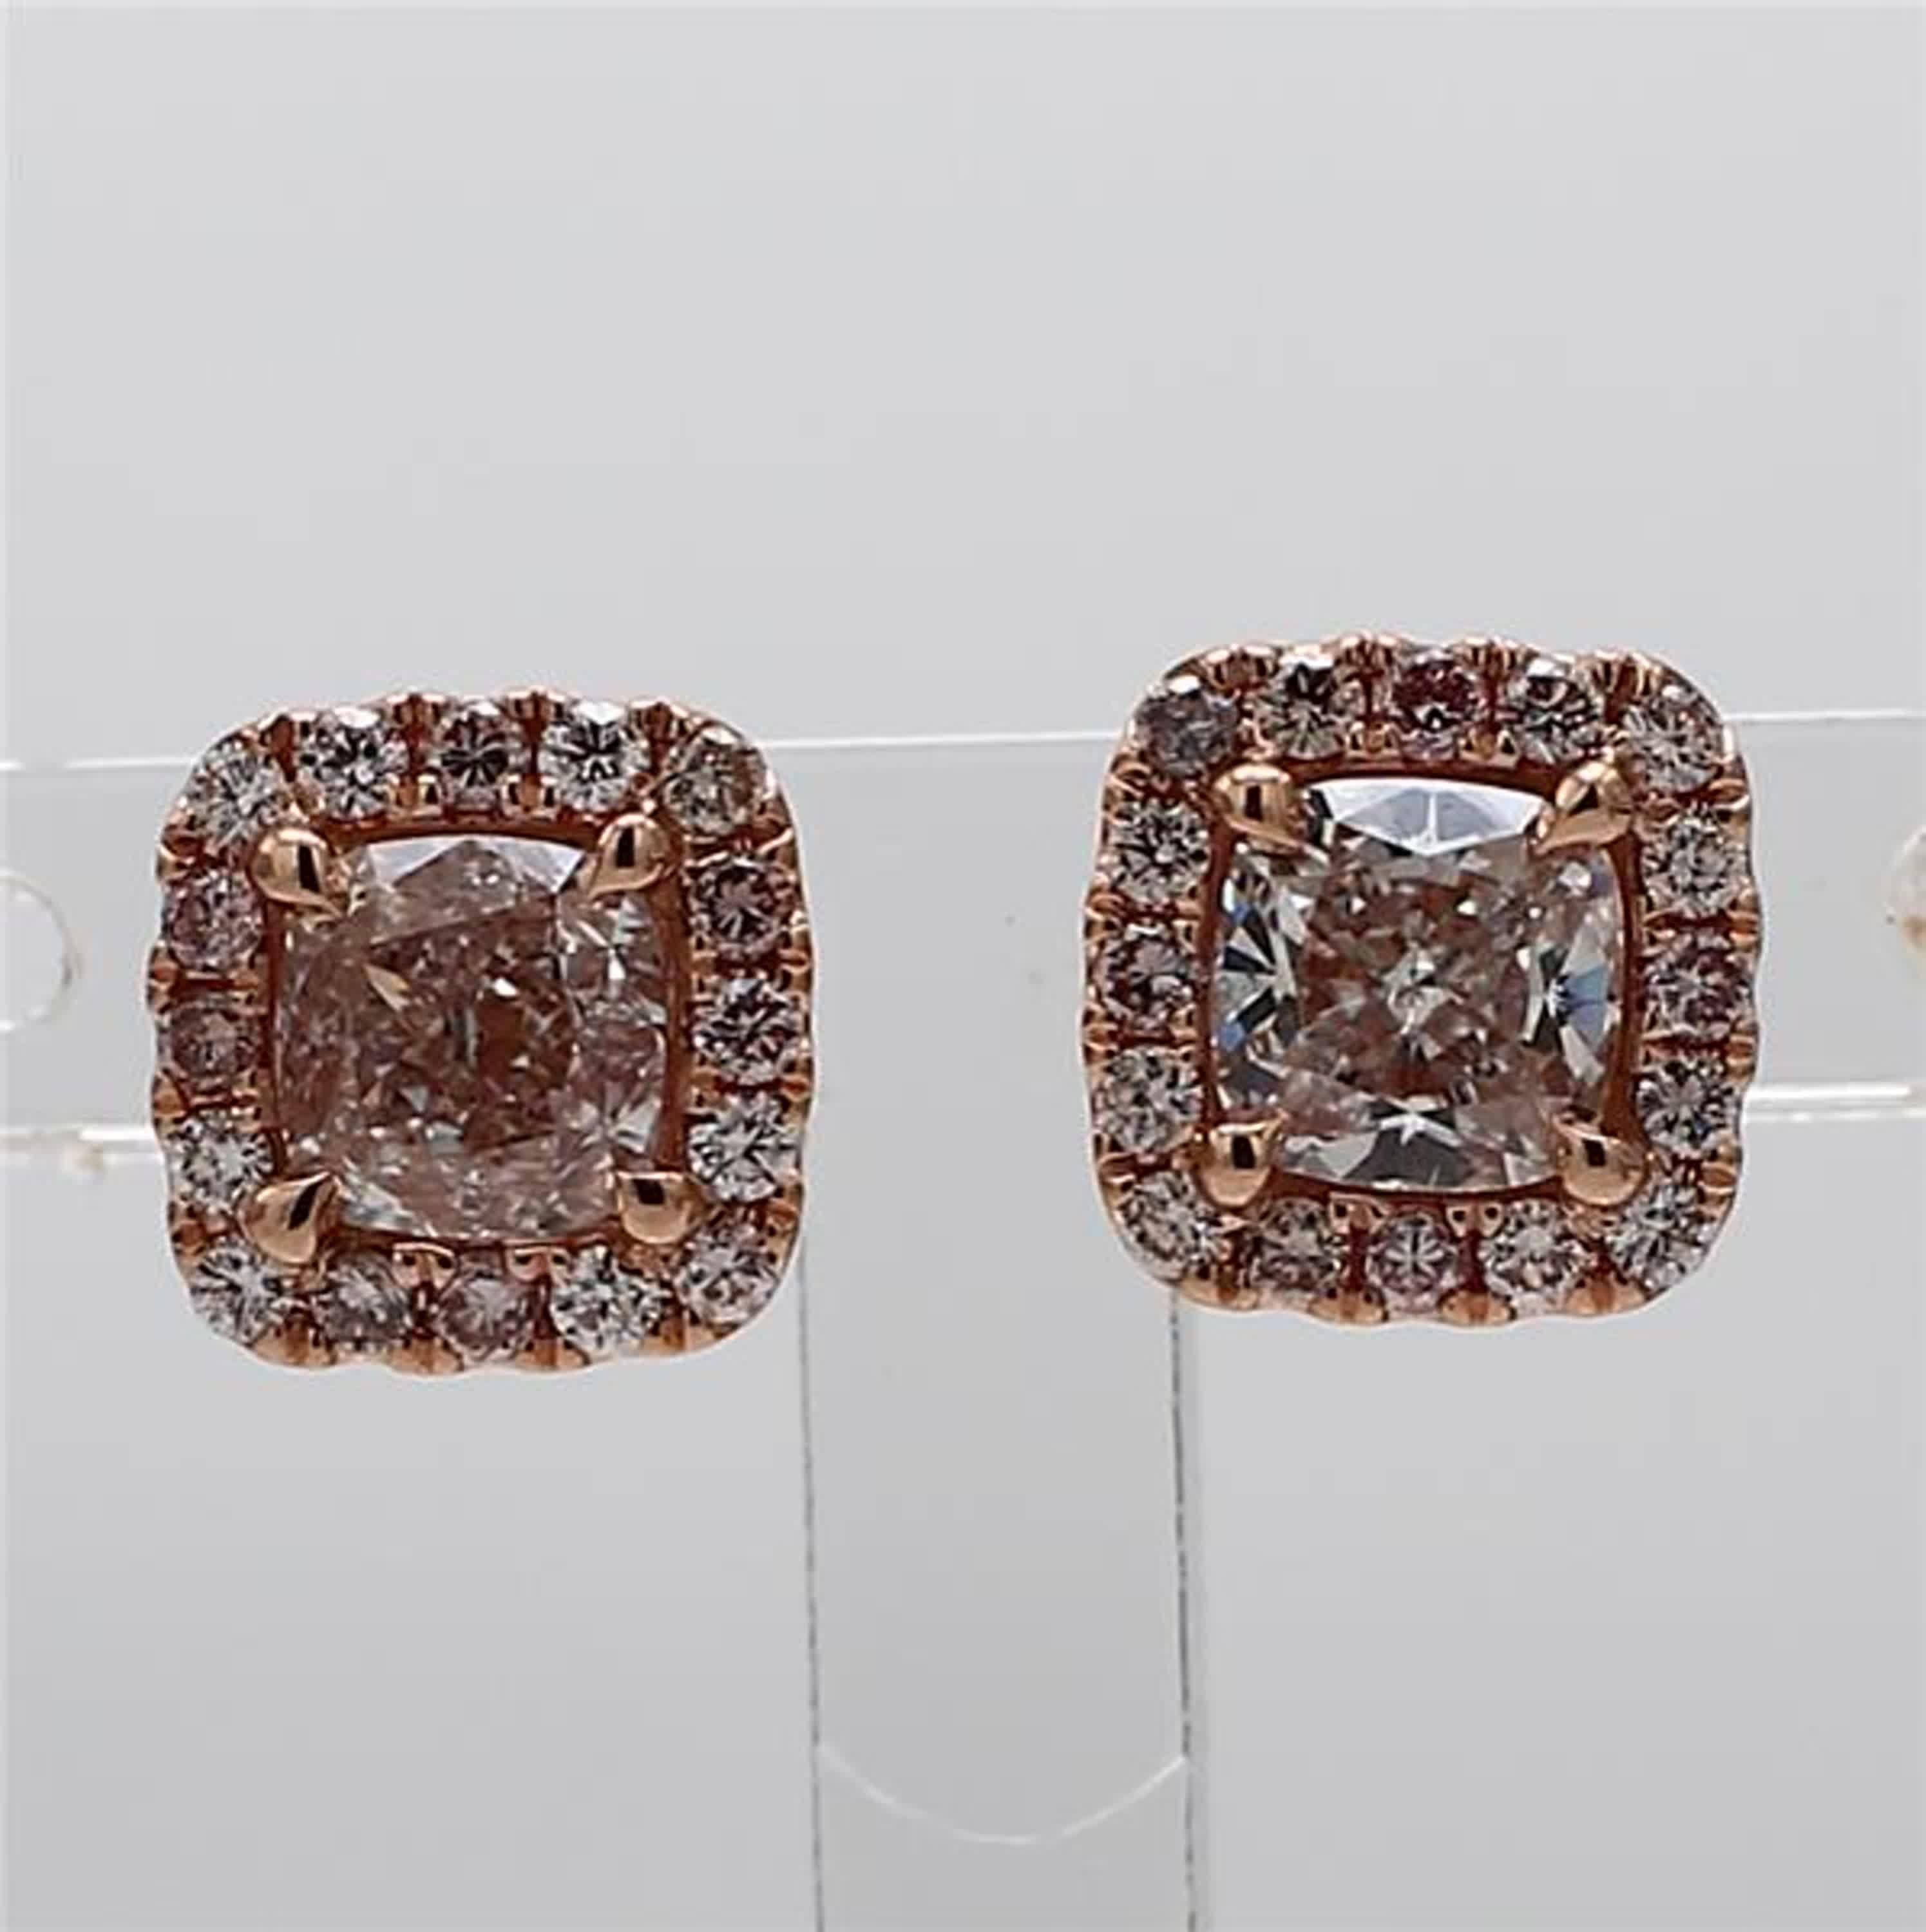 RareGemWorld's classic GIA certified diamond earrings. Mounted in a beautiful 18K Rose Gold setting with natural cushion cut pink diamonds. The pink diamonds are surrounded by round natural pink diamond melee. These earrings are guaranteed to